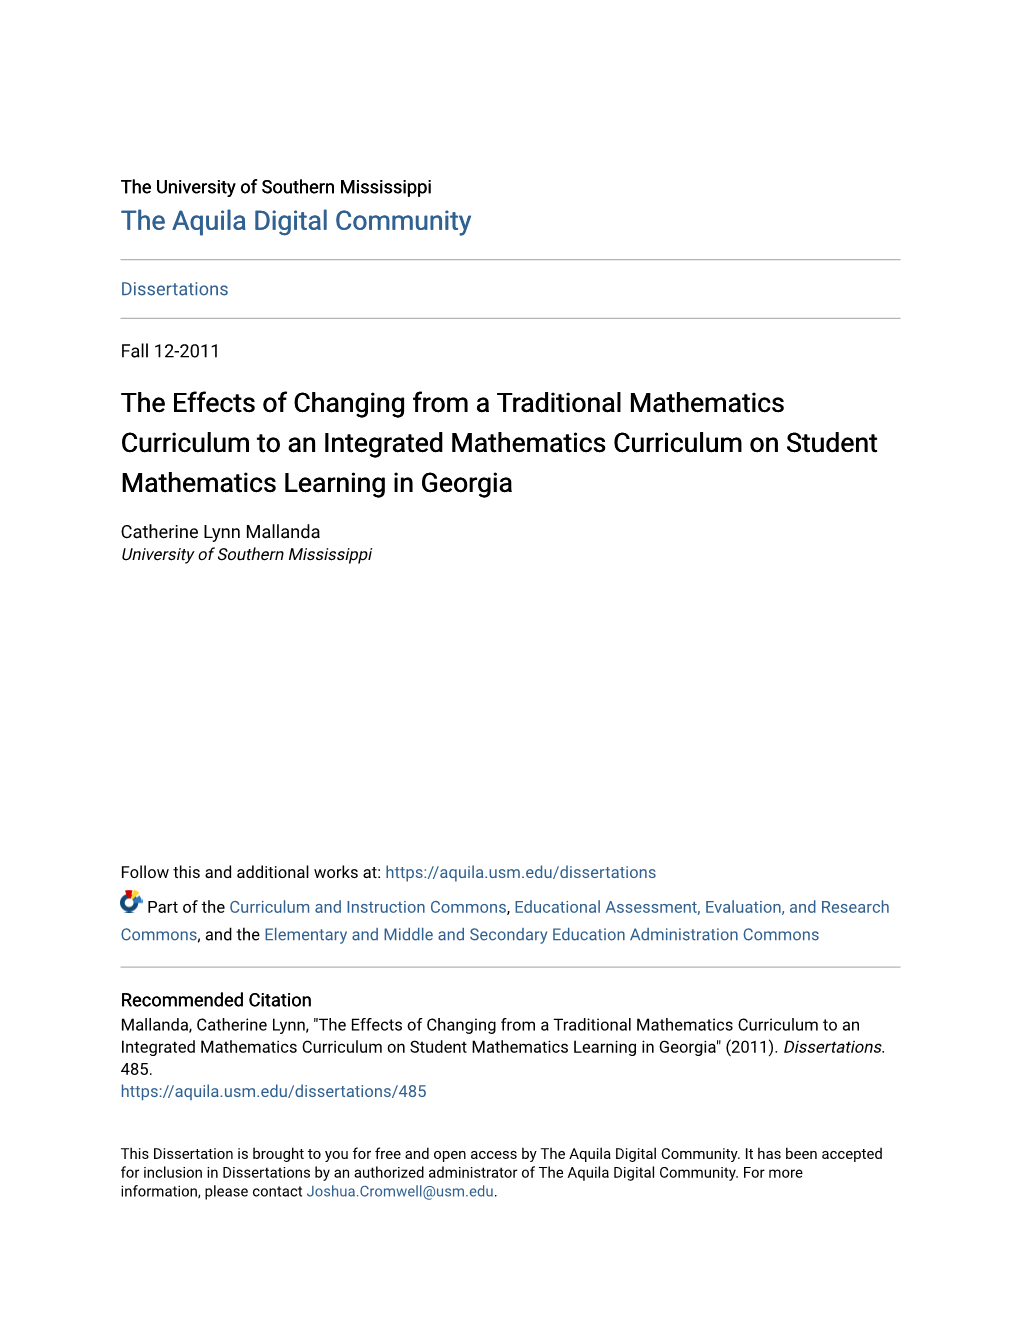 The Effects of Changing from a Traditional Mathematics Curriculum to an Integrated Mathematics Curriculum on Student Mathematics Learning in Georgia